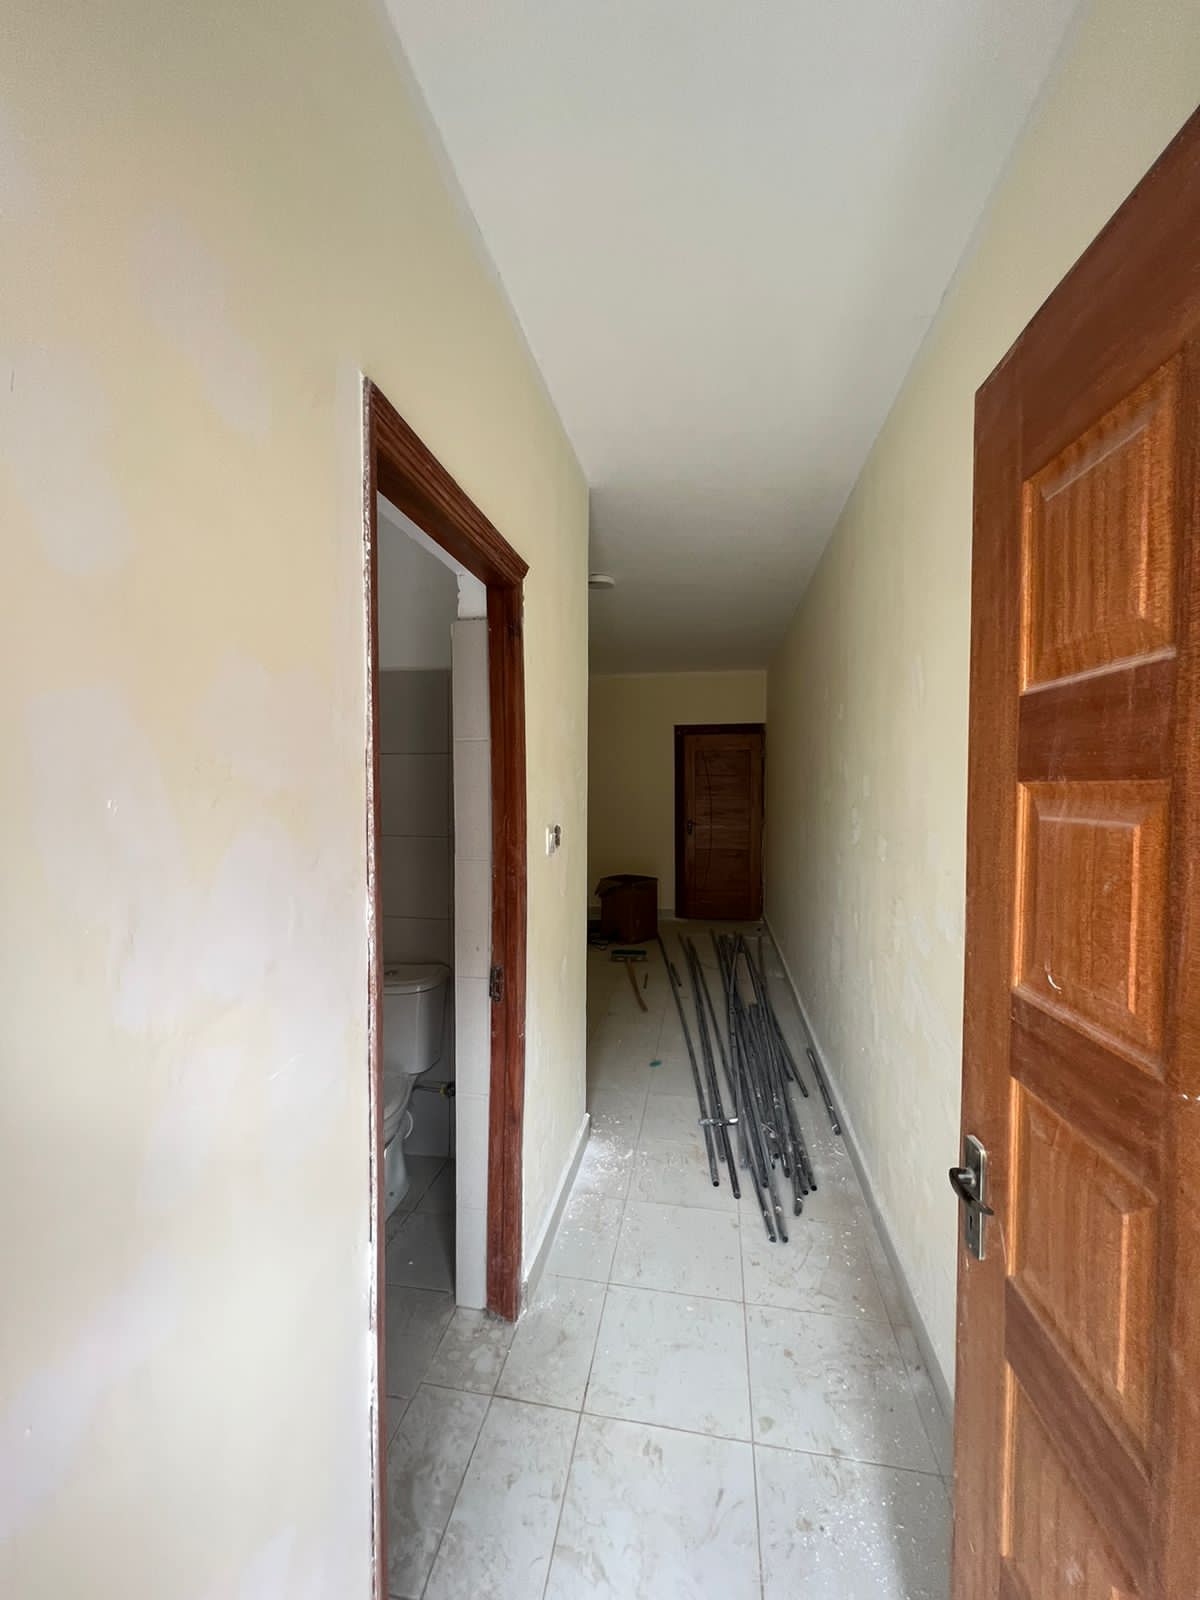 3 bedroom apartment 2 bedroom apartment to let in Kilimani, Nairobi. Balcony at the sitting area. Back up generator. Rent per month 2bedroom 90,000. Musilli Homes